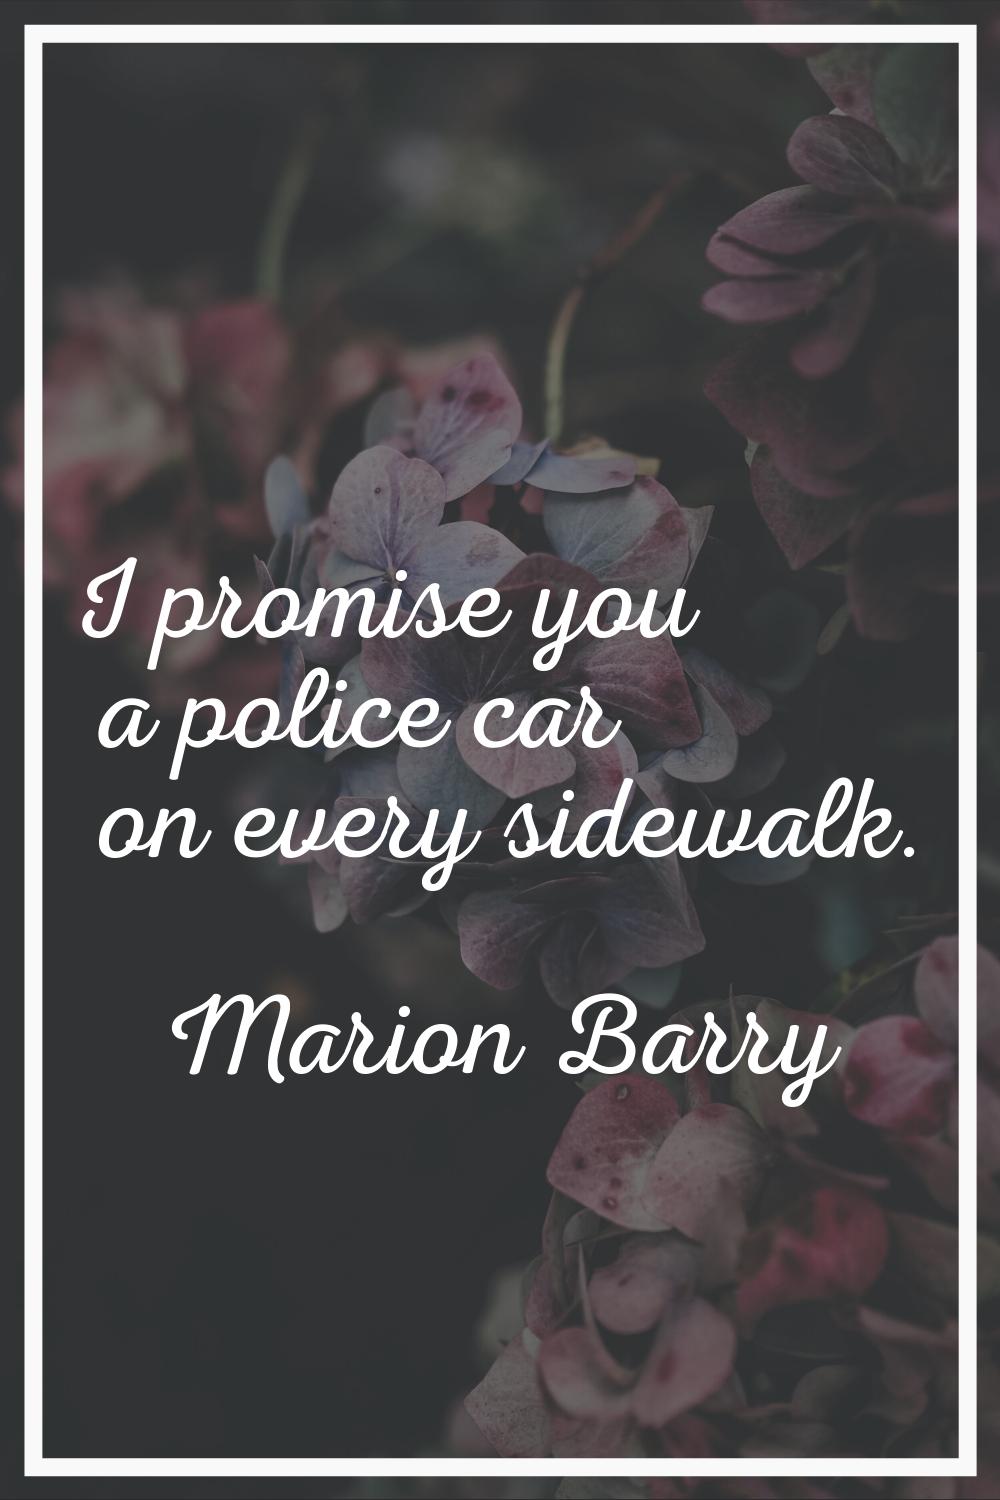 I promise you a police car on every sidewalk.